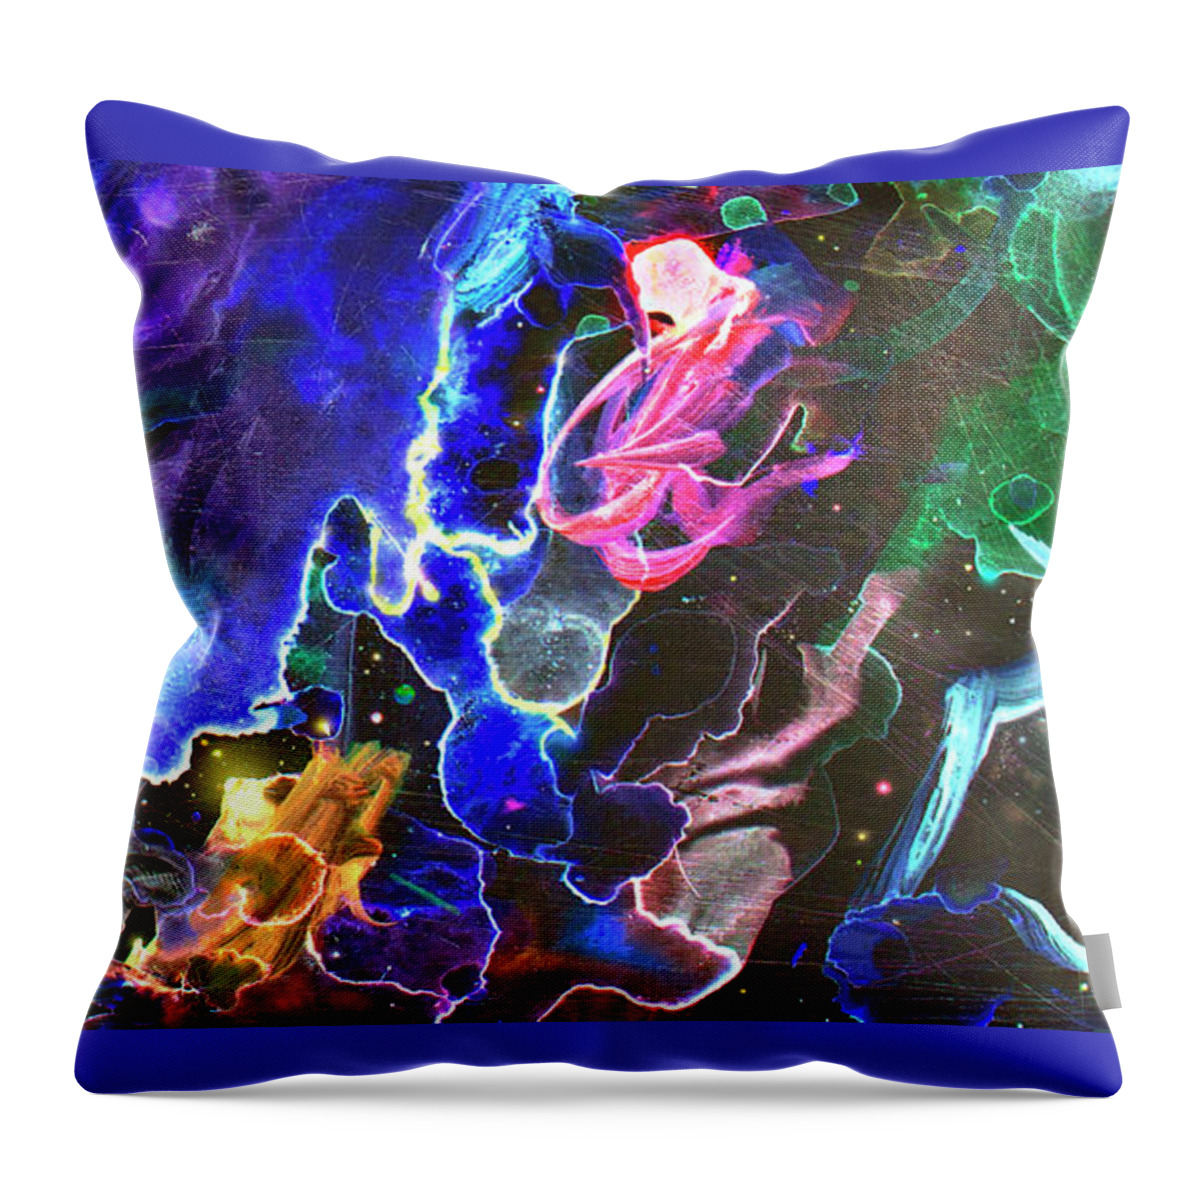 Universe Throw Pillow featuring the painting Journey by John Dyess